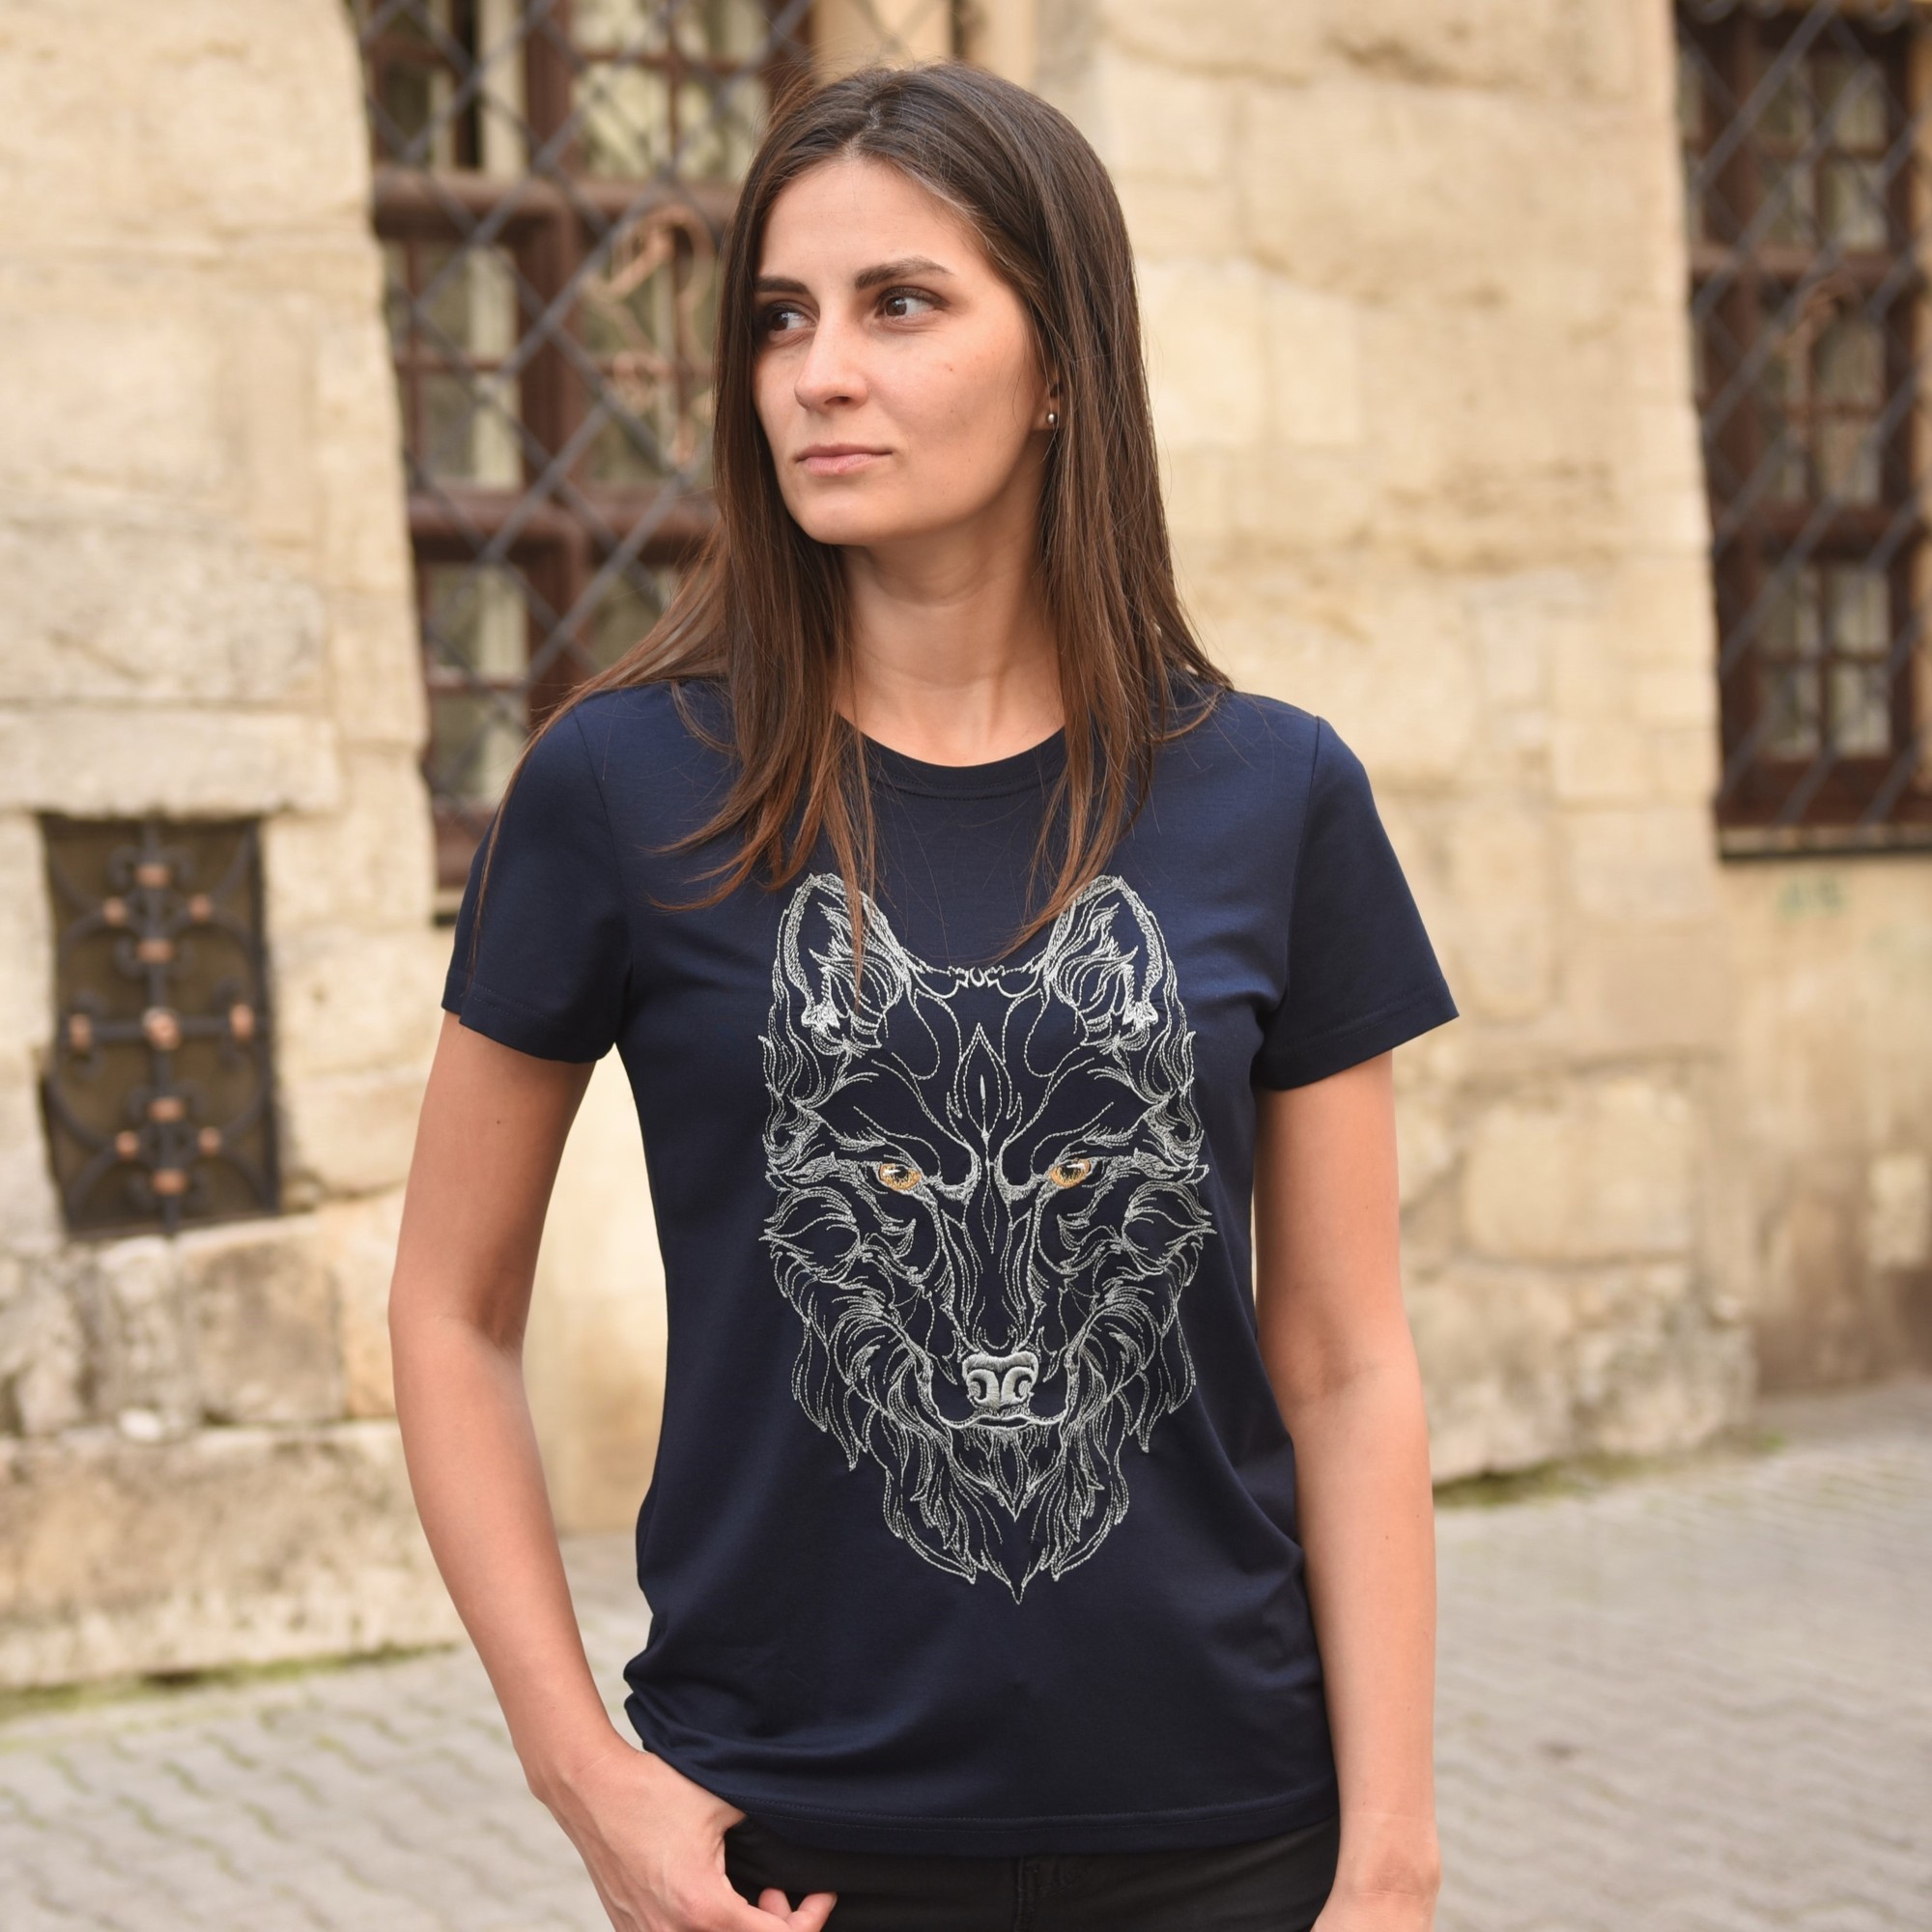 Women's T-shirt with embroidery - "Wolf"